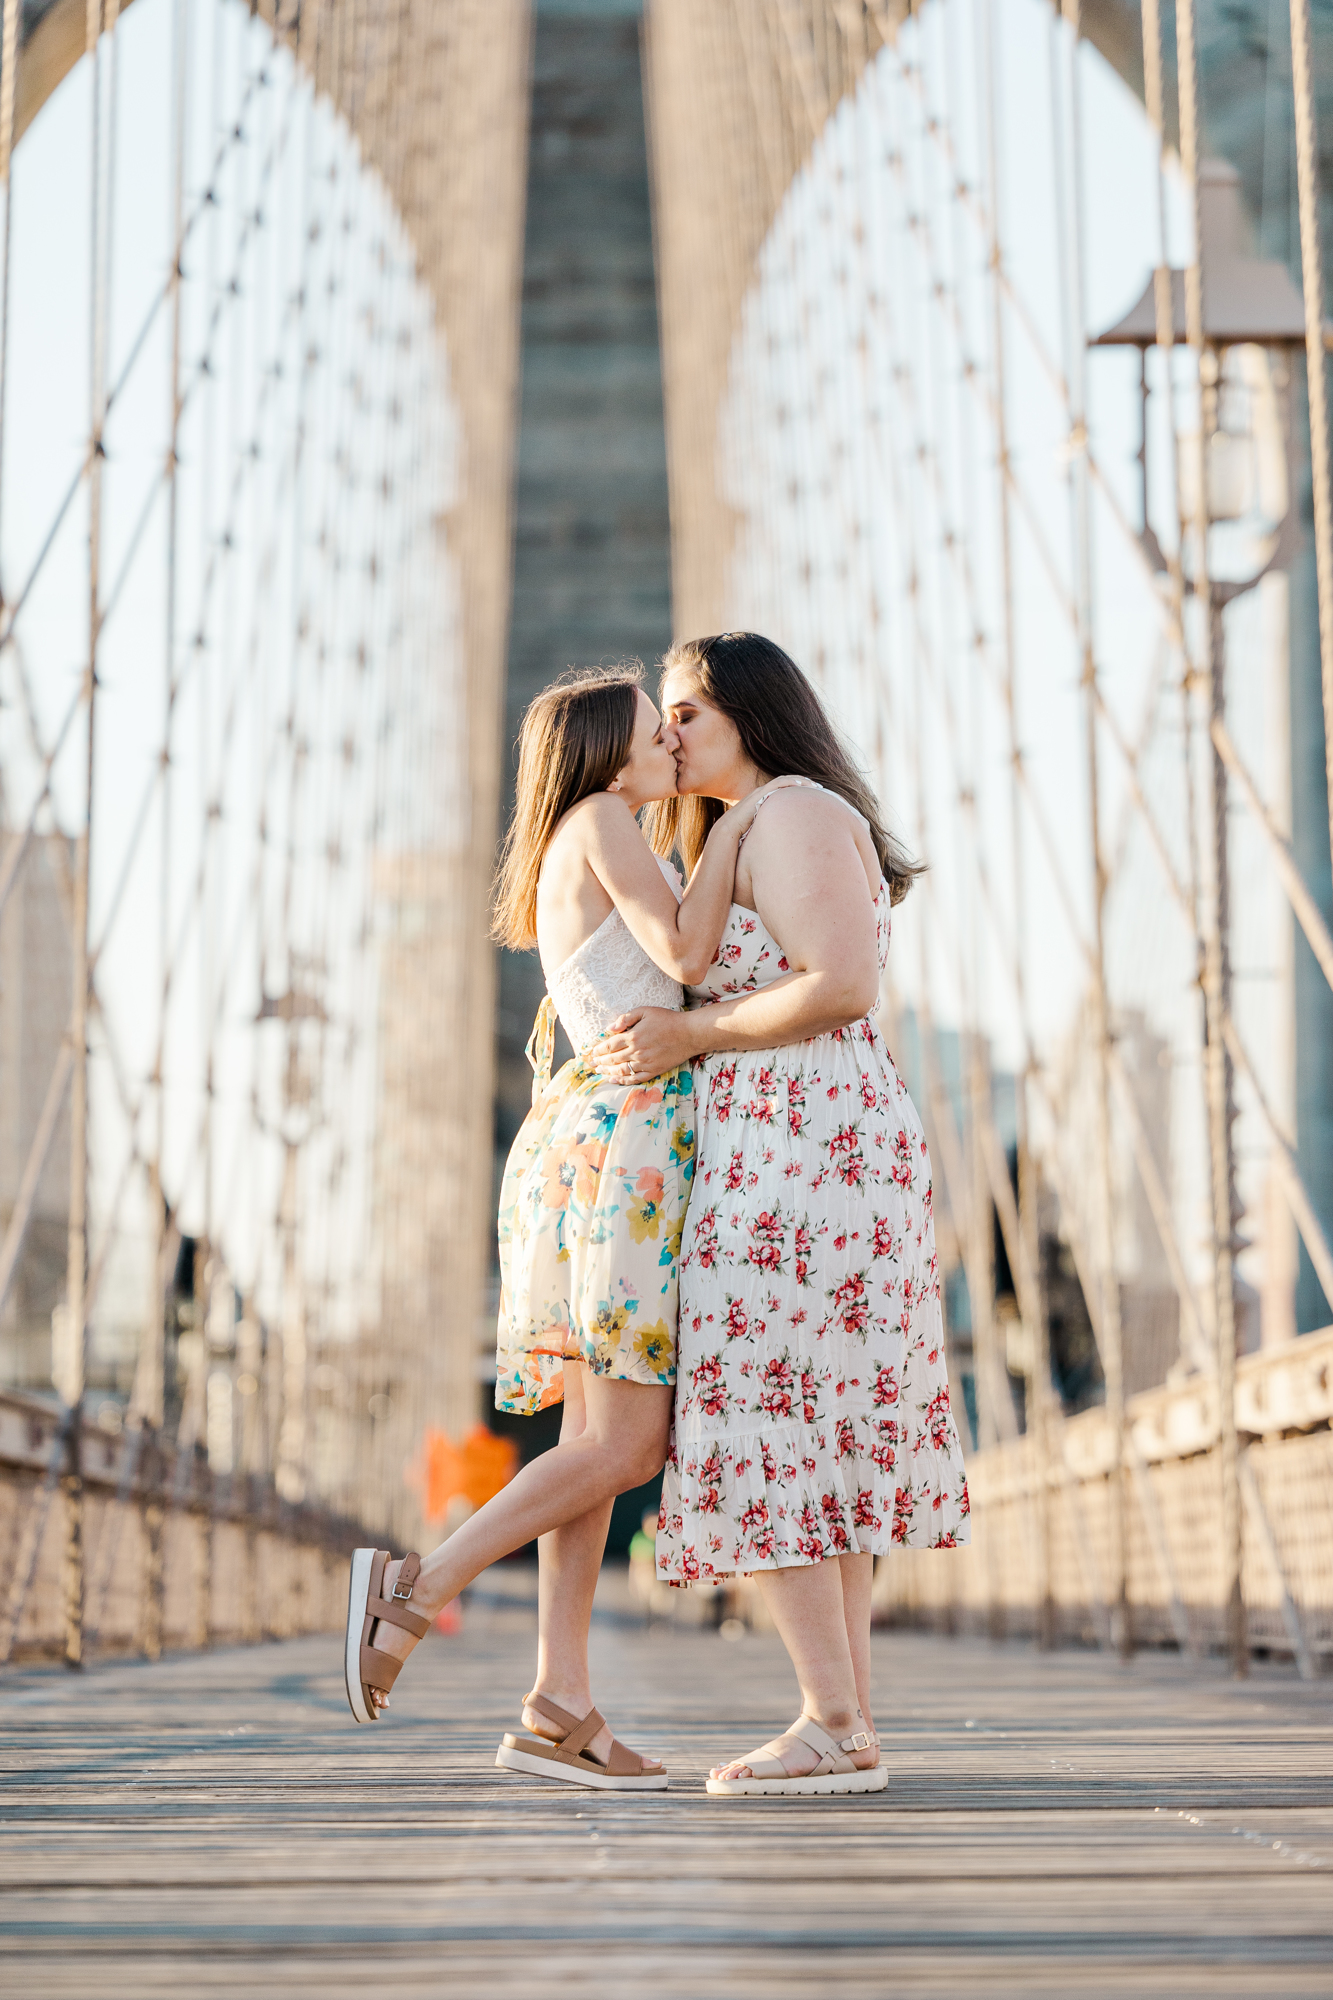 Spectacular Springtime Engagement Photo Shoot in DUMBO